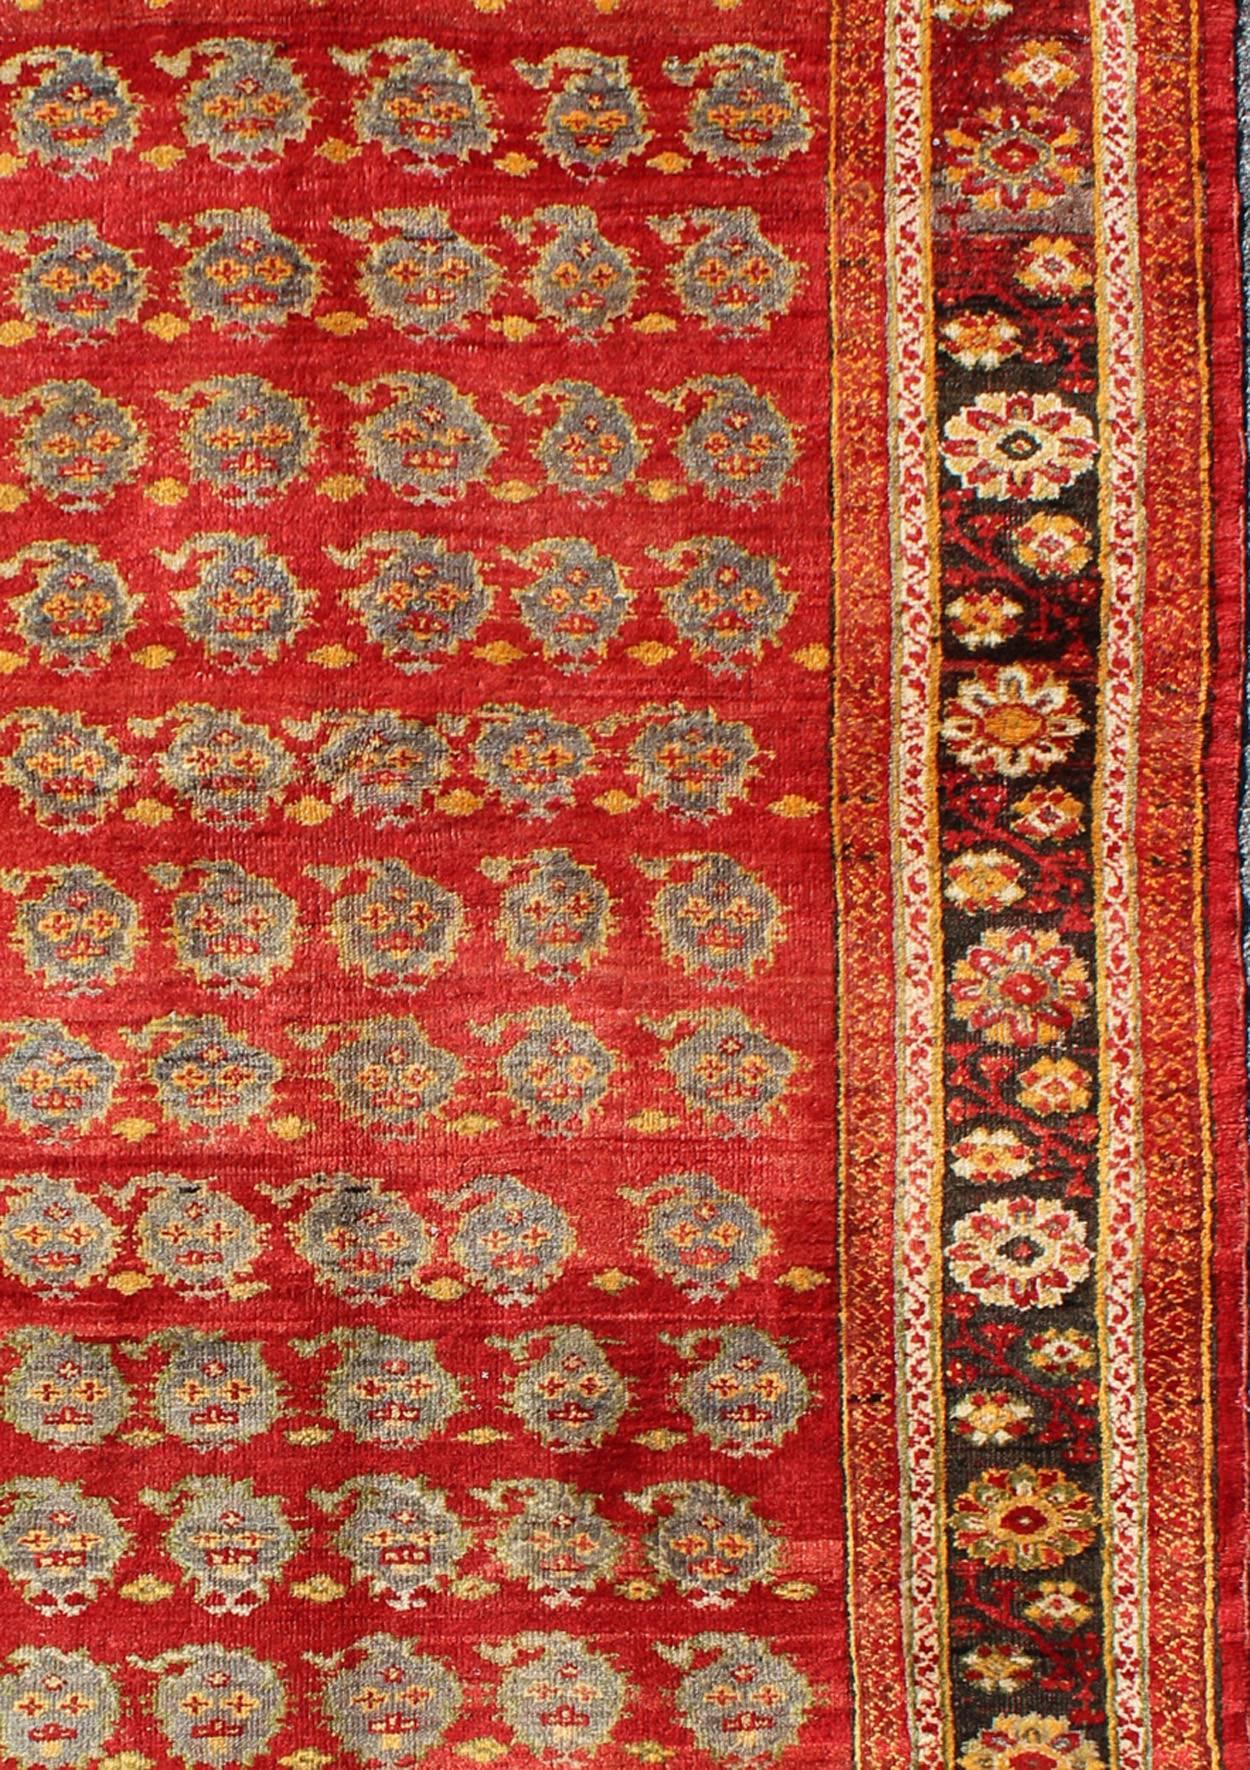 Vintage Turkish Oushak Carpet with All-Over Paisley Design and Central Red Field In Excellent Condition For Sale In Atlanta, GA